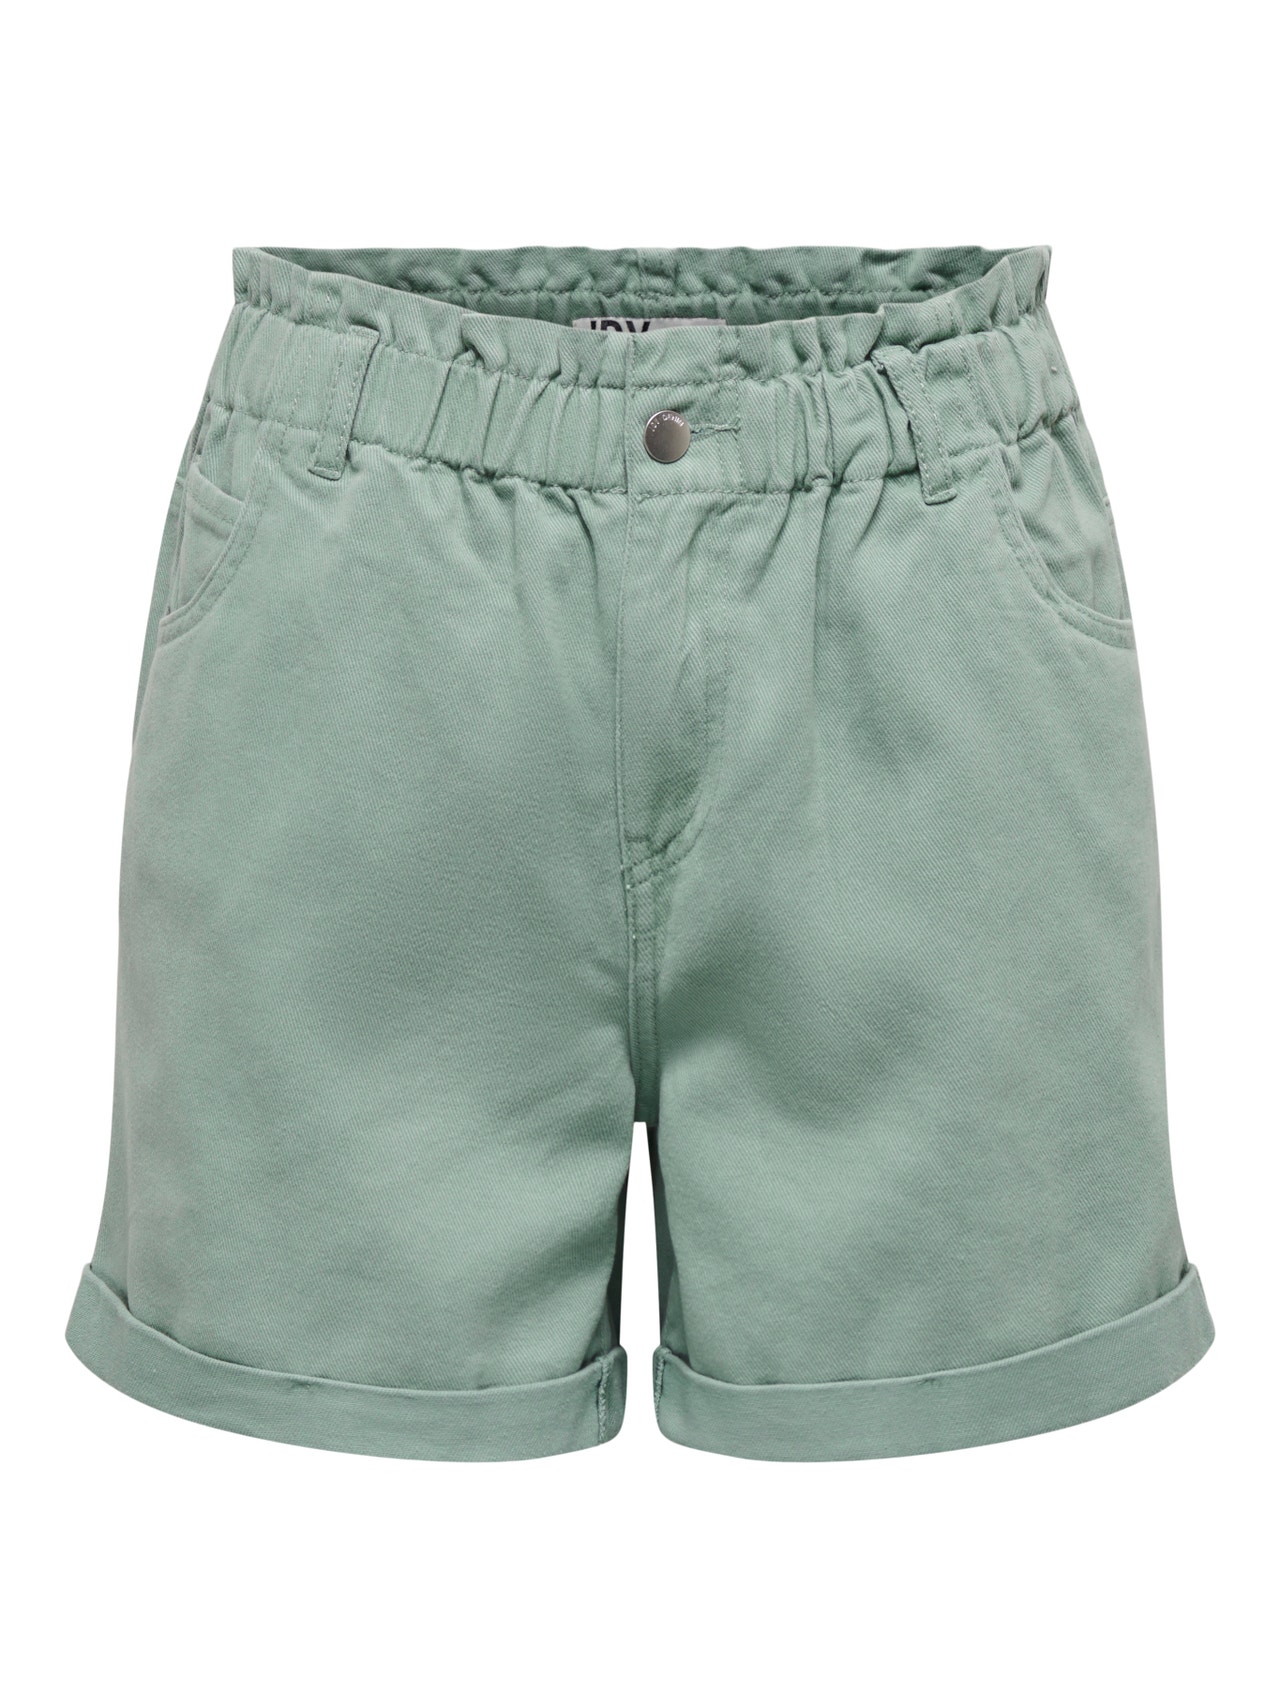 ONLY Highwaisted Shorts -Chinois Green - 15257540